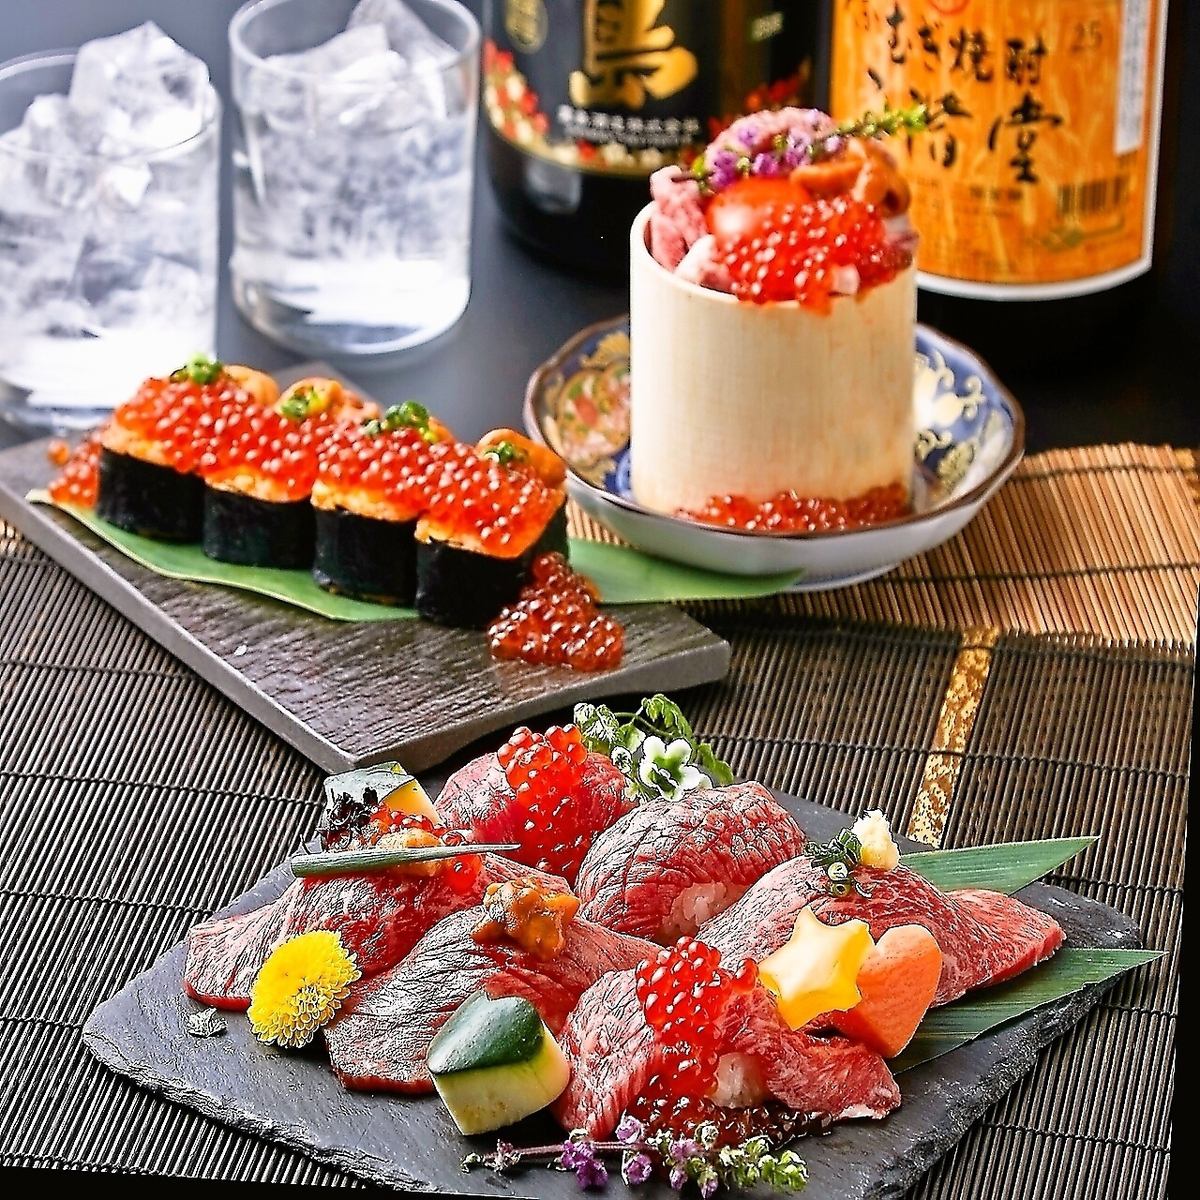 [Instagrammable ◎] Enjoy meat sushi and beef tongue ♪ There are many all-you-can-eat courses